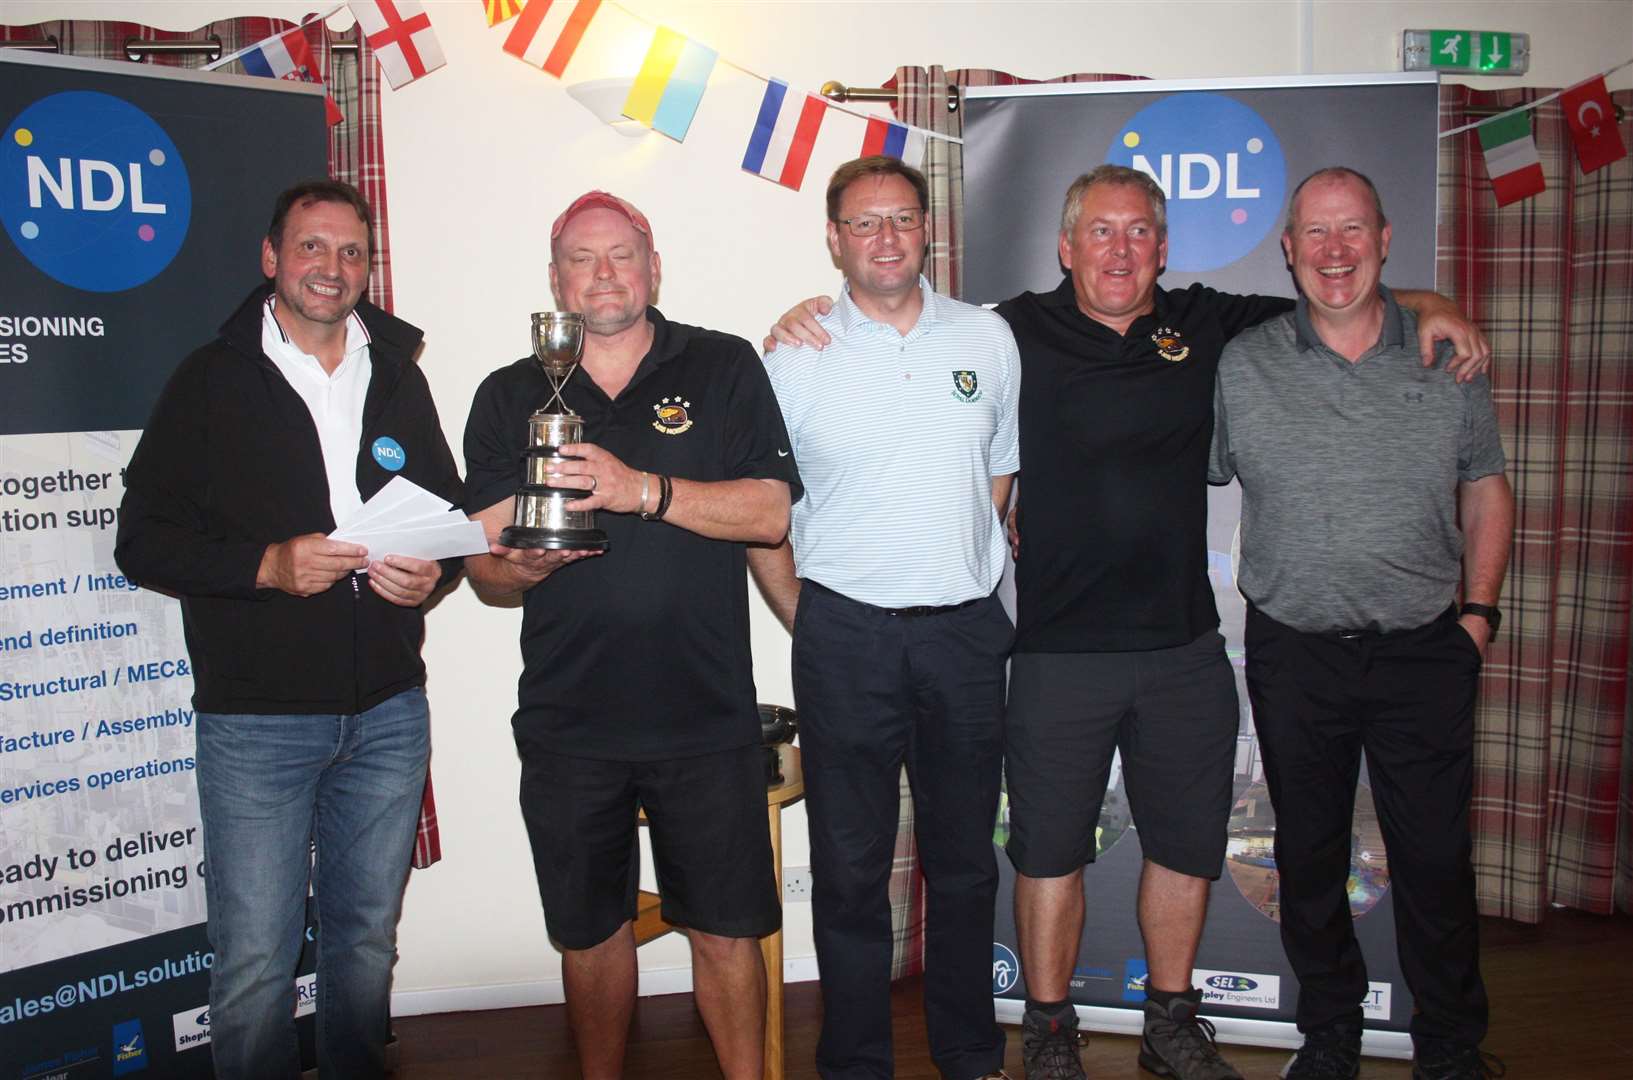 Reay Safari Open winners Summer Tactics being presented with the trophy by James Mowat of NDL. From left: James Mowat, Lee Parnell, Colin Paterson, Steve Efemey and Andrew Taylor